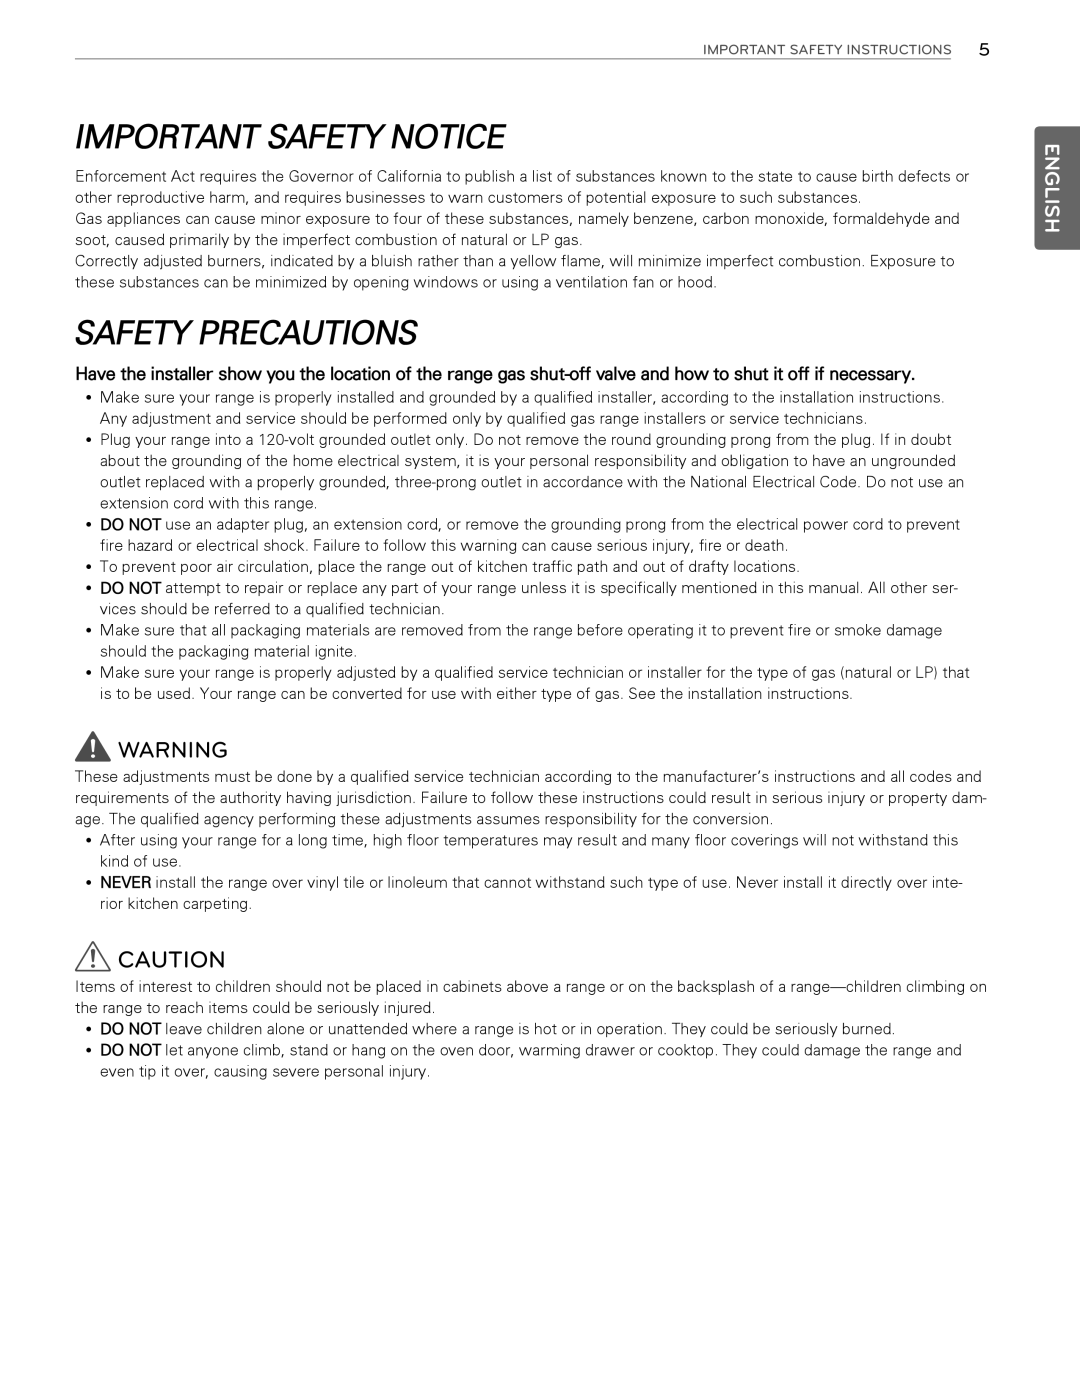 LG Electronics LDG3015ST, LDG3016ST Important Safety Notice, Safety Precautions, English, Important Safety Instructions 